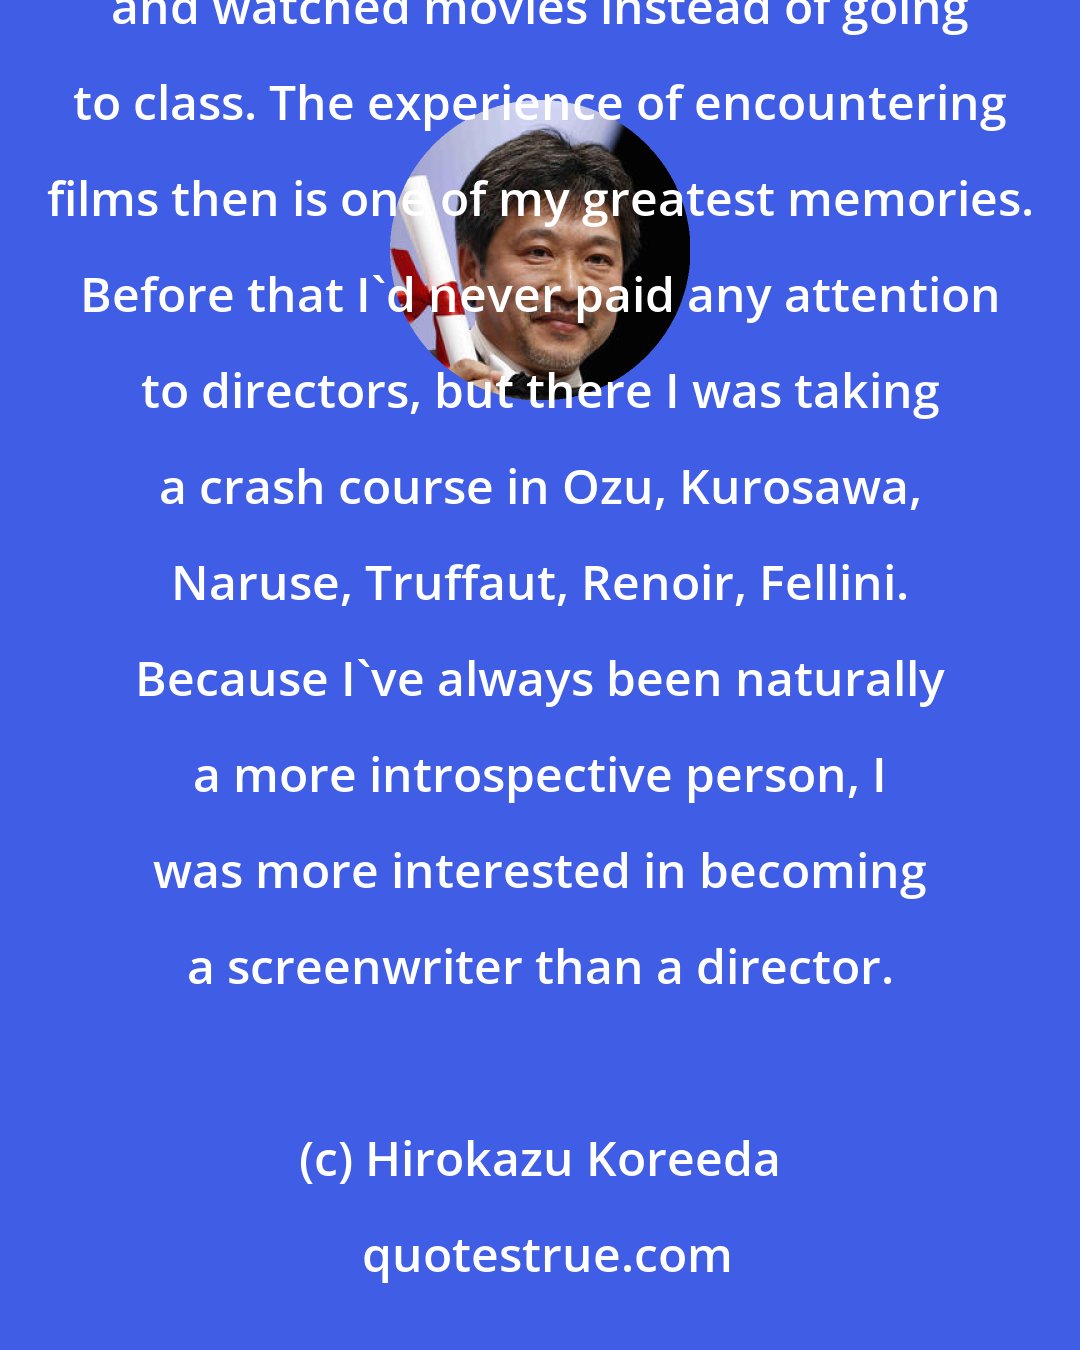 Hirokazu Koreeda: In the neighborhood around Waseda, there were all these movie theaters, so every morning I left the house and watched movies instead of going to class. The experience of encountering films then is one of my greatest memories. Before that I'd never paid any attention to directors, but there I was taking a crash course in Ozu, Kurosawa, Naruse, Truffaut, Renoir, Fellini. Because I've always been naturally a more introspective person, I was more interested in becoming a screenwriter than a director.